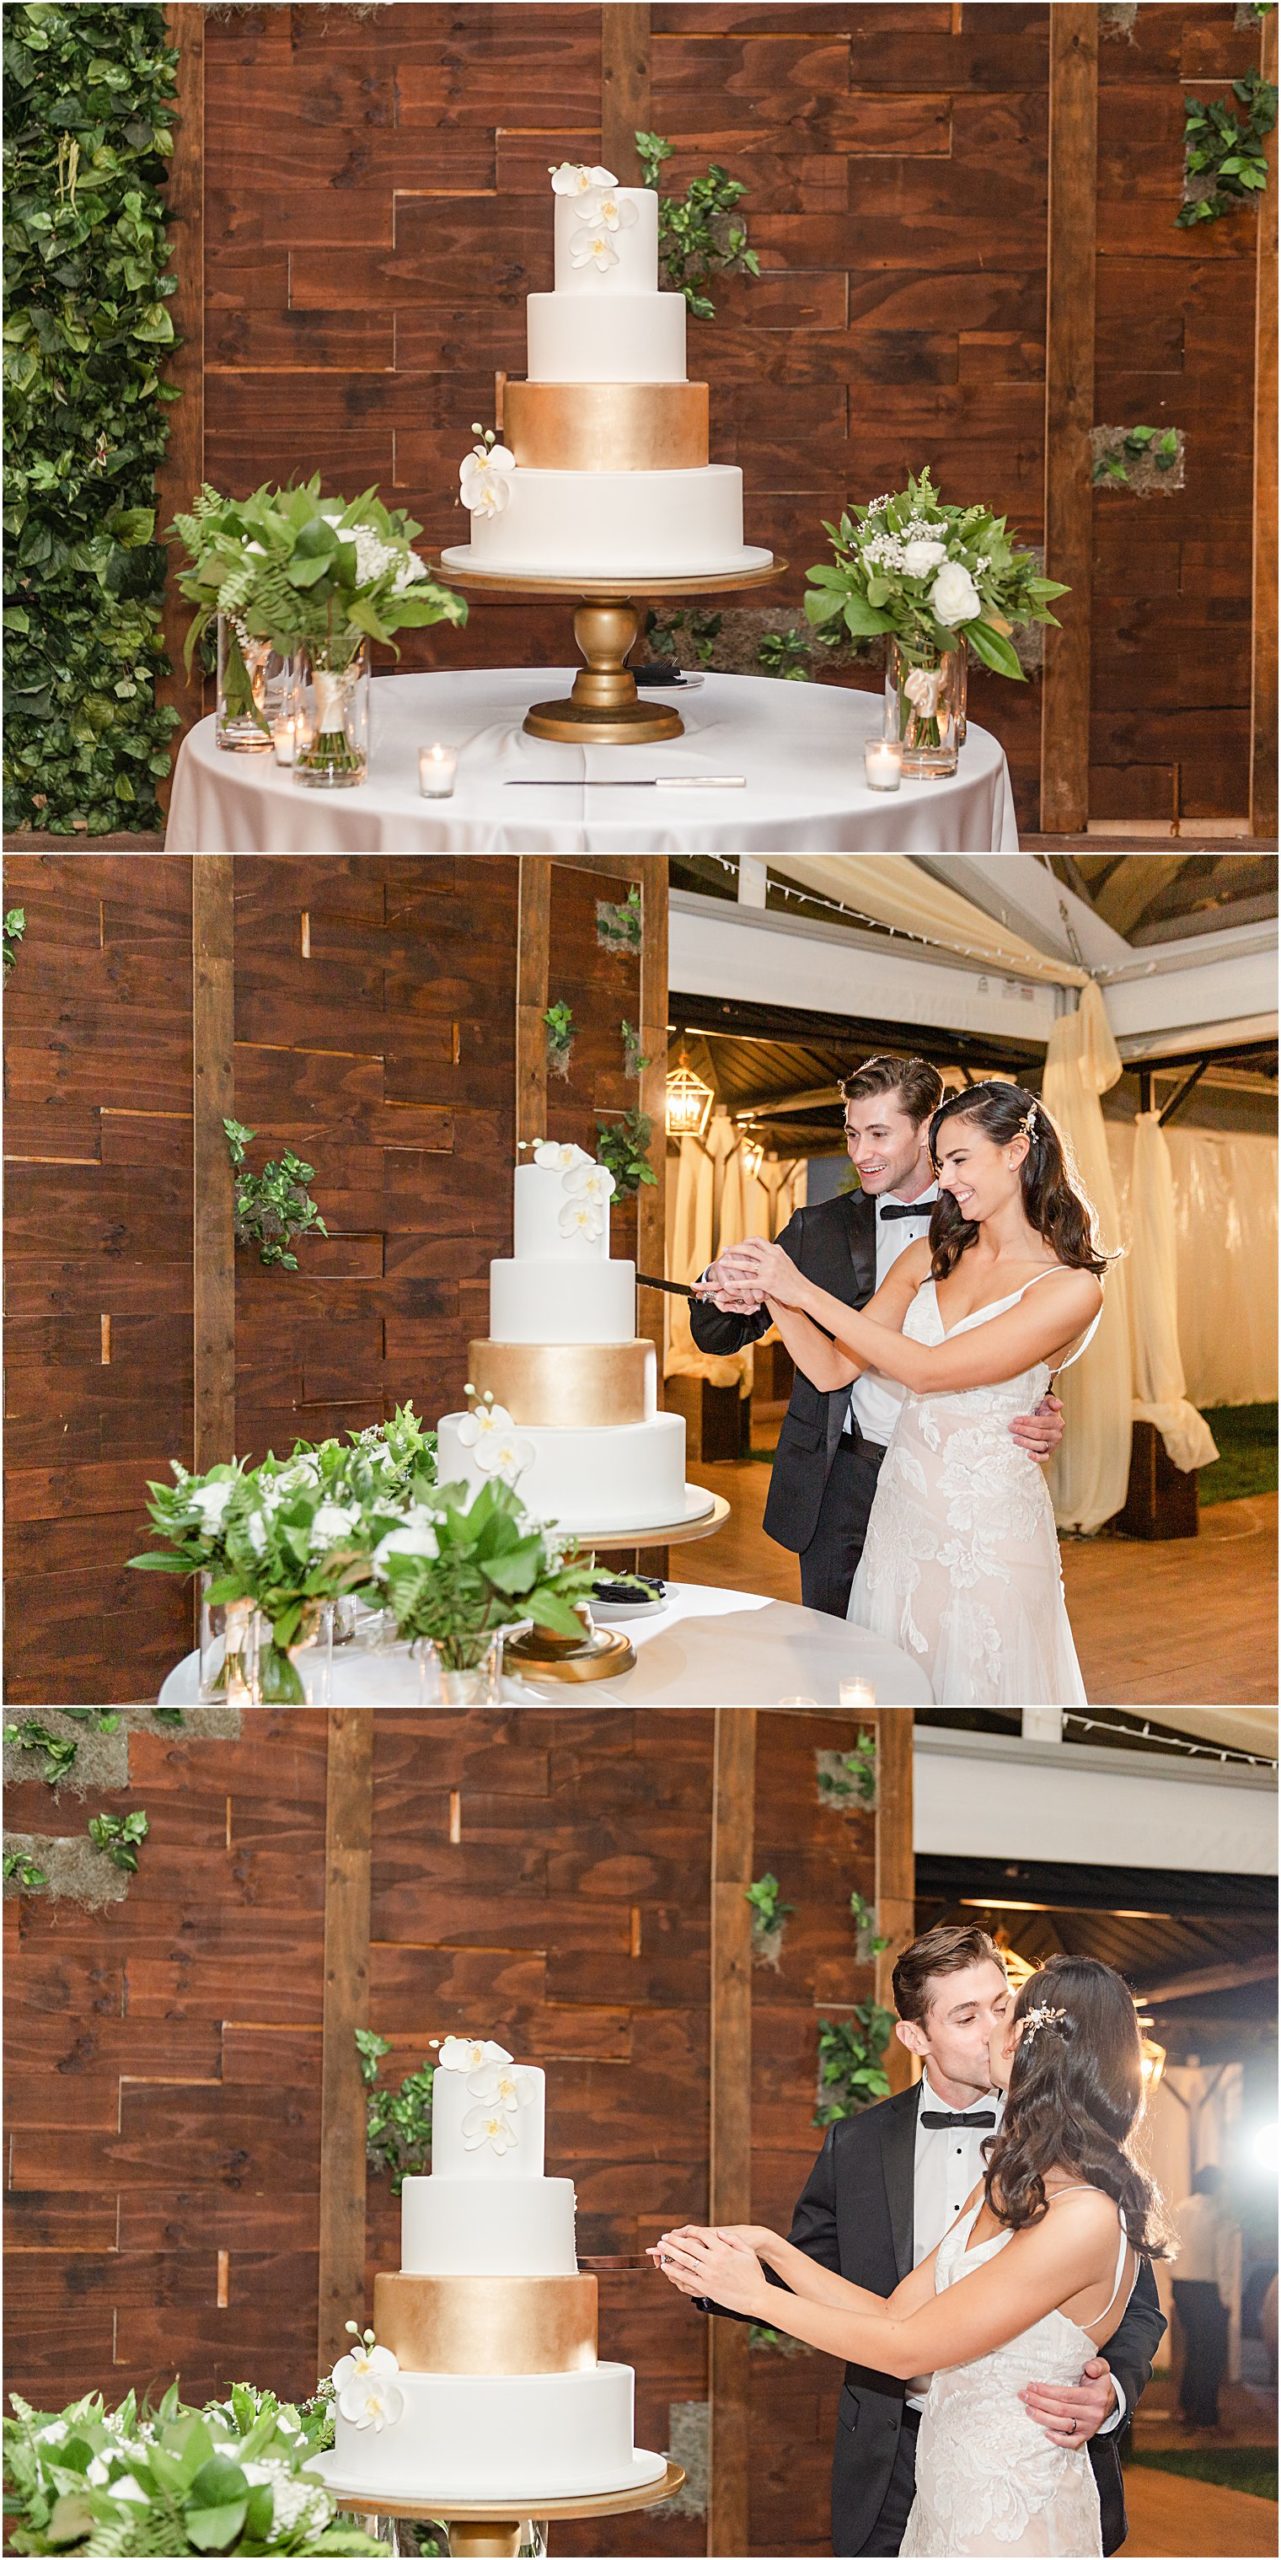 3 pictures of Bride + Groom and their wedding cake